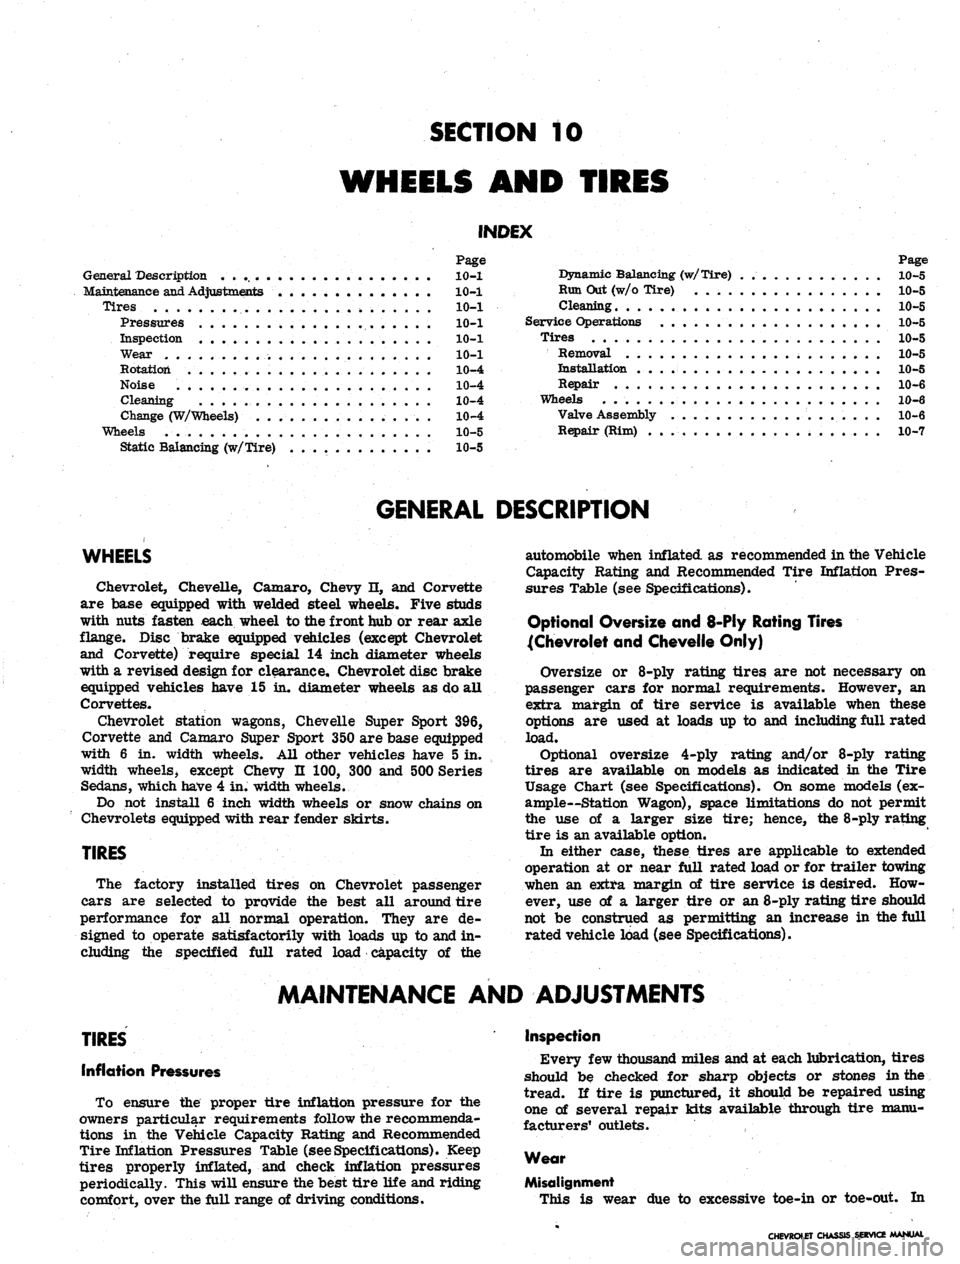 CHEVROLET CAMARO 1967 1.G Chassis Workshop Manual 
SECTION 10

WHEELS AND TIRES

INDEX

Page

General Description
 10-1

Maintenance
 and
 Adjustments
 .............. 10—1

Tires
 10-1

Pressures . 10-1

Inspection 10-1

Wear 10-1

Rotation 10-4

N